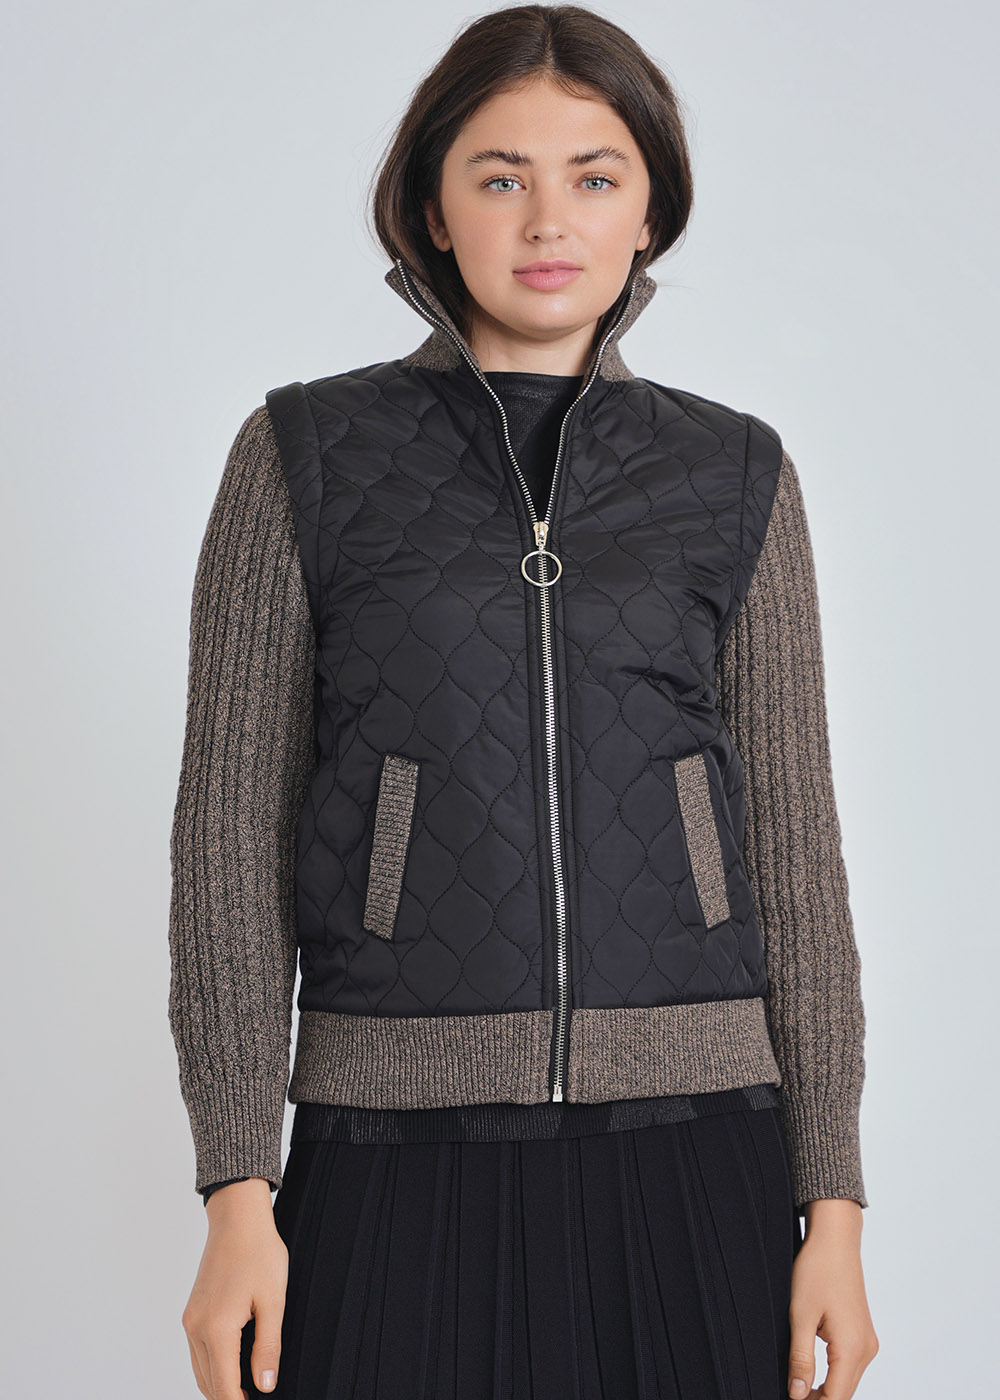 Black & Brown Masterpiece: Quilted Base with Cable Knit Touches